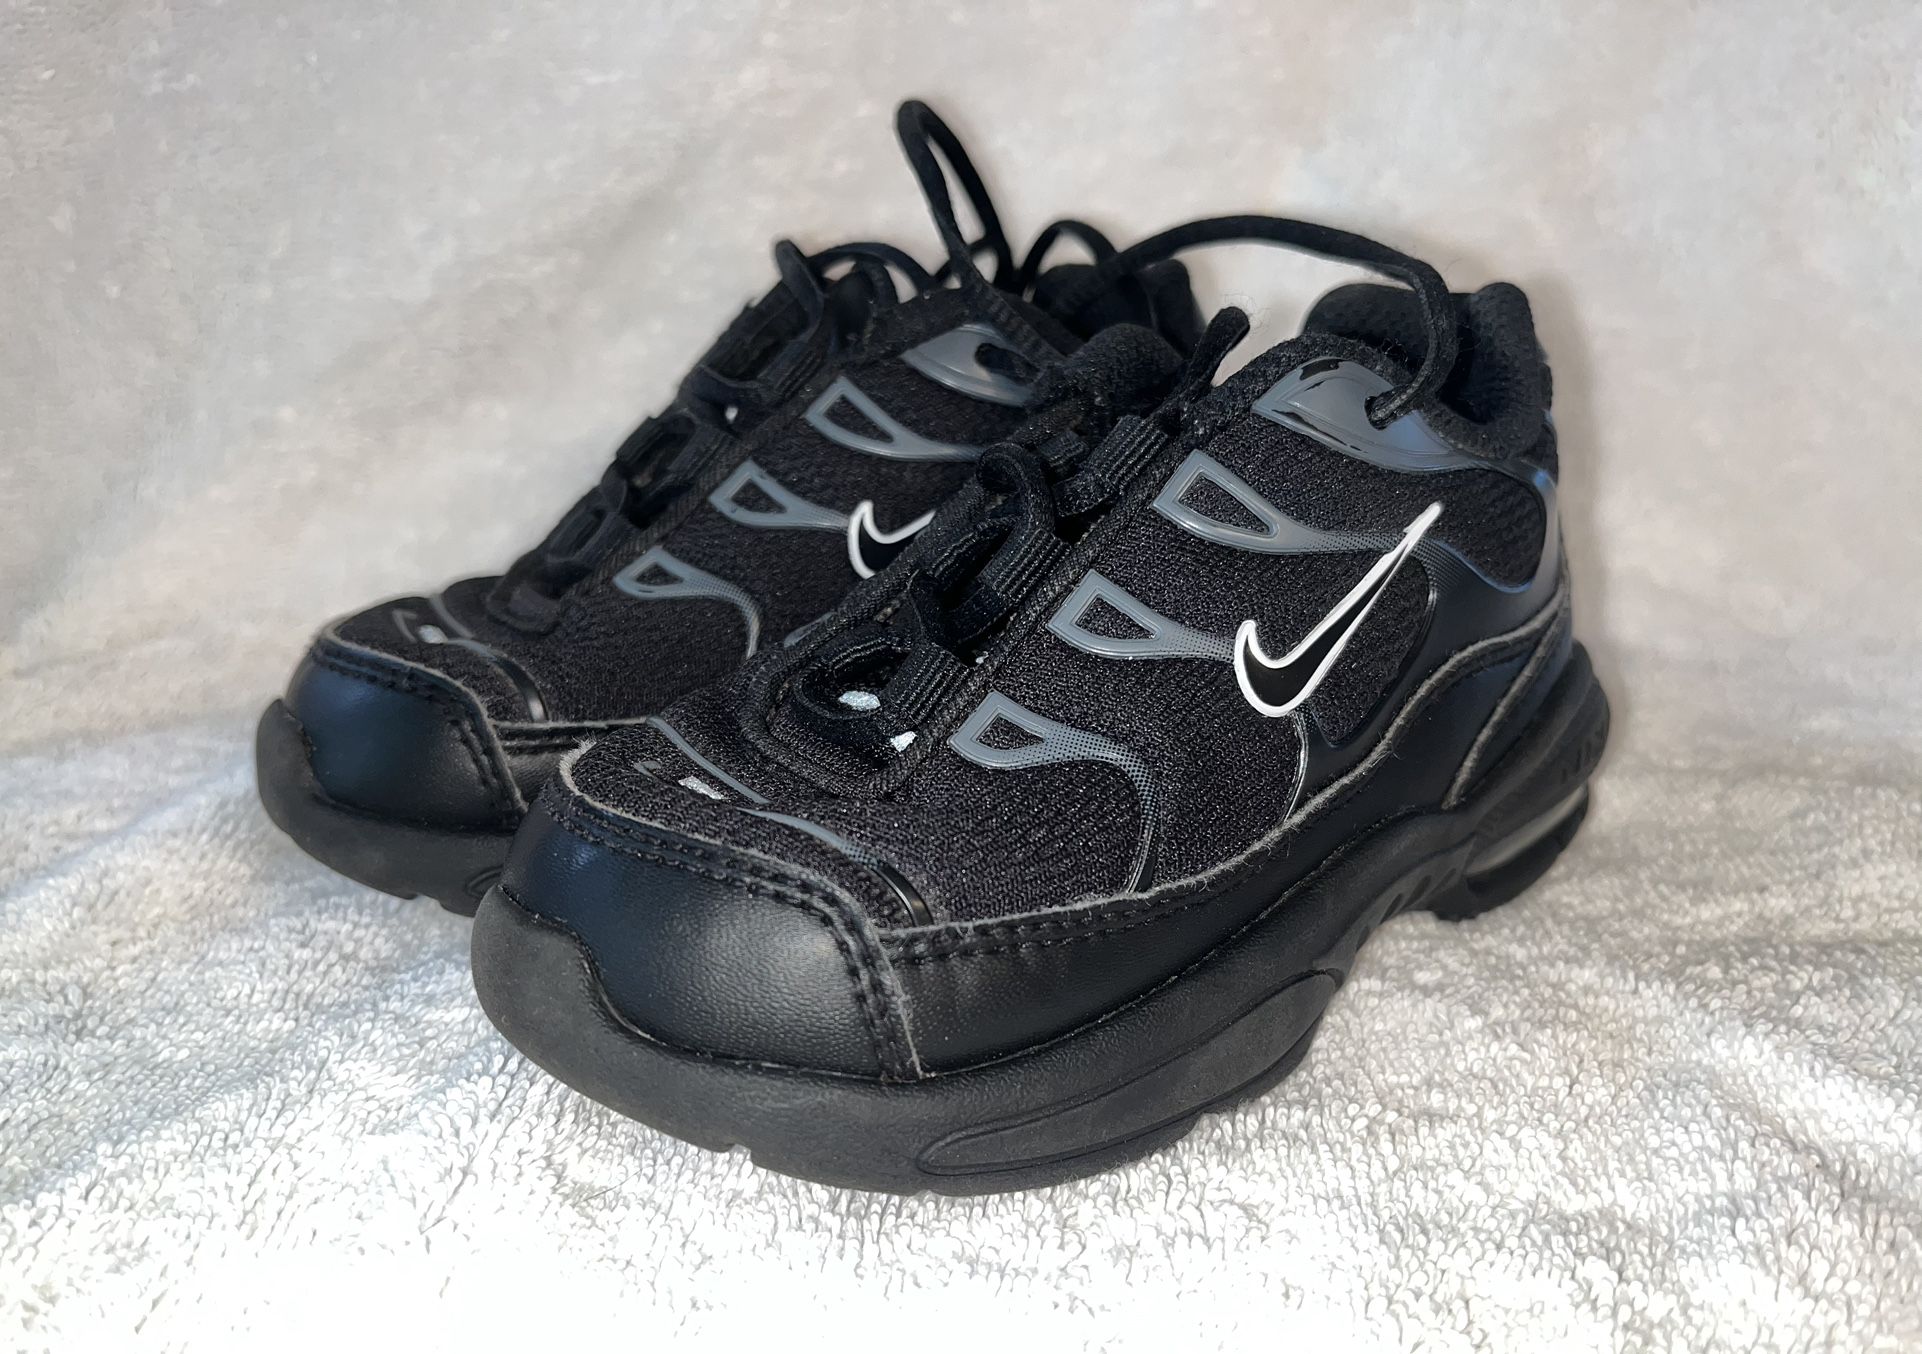 Nike Little Air Max Black Pure Platinum Toddler Baby Shoes 314730-053 size 7C